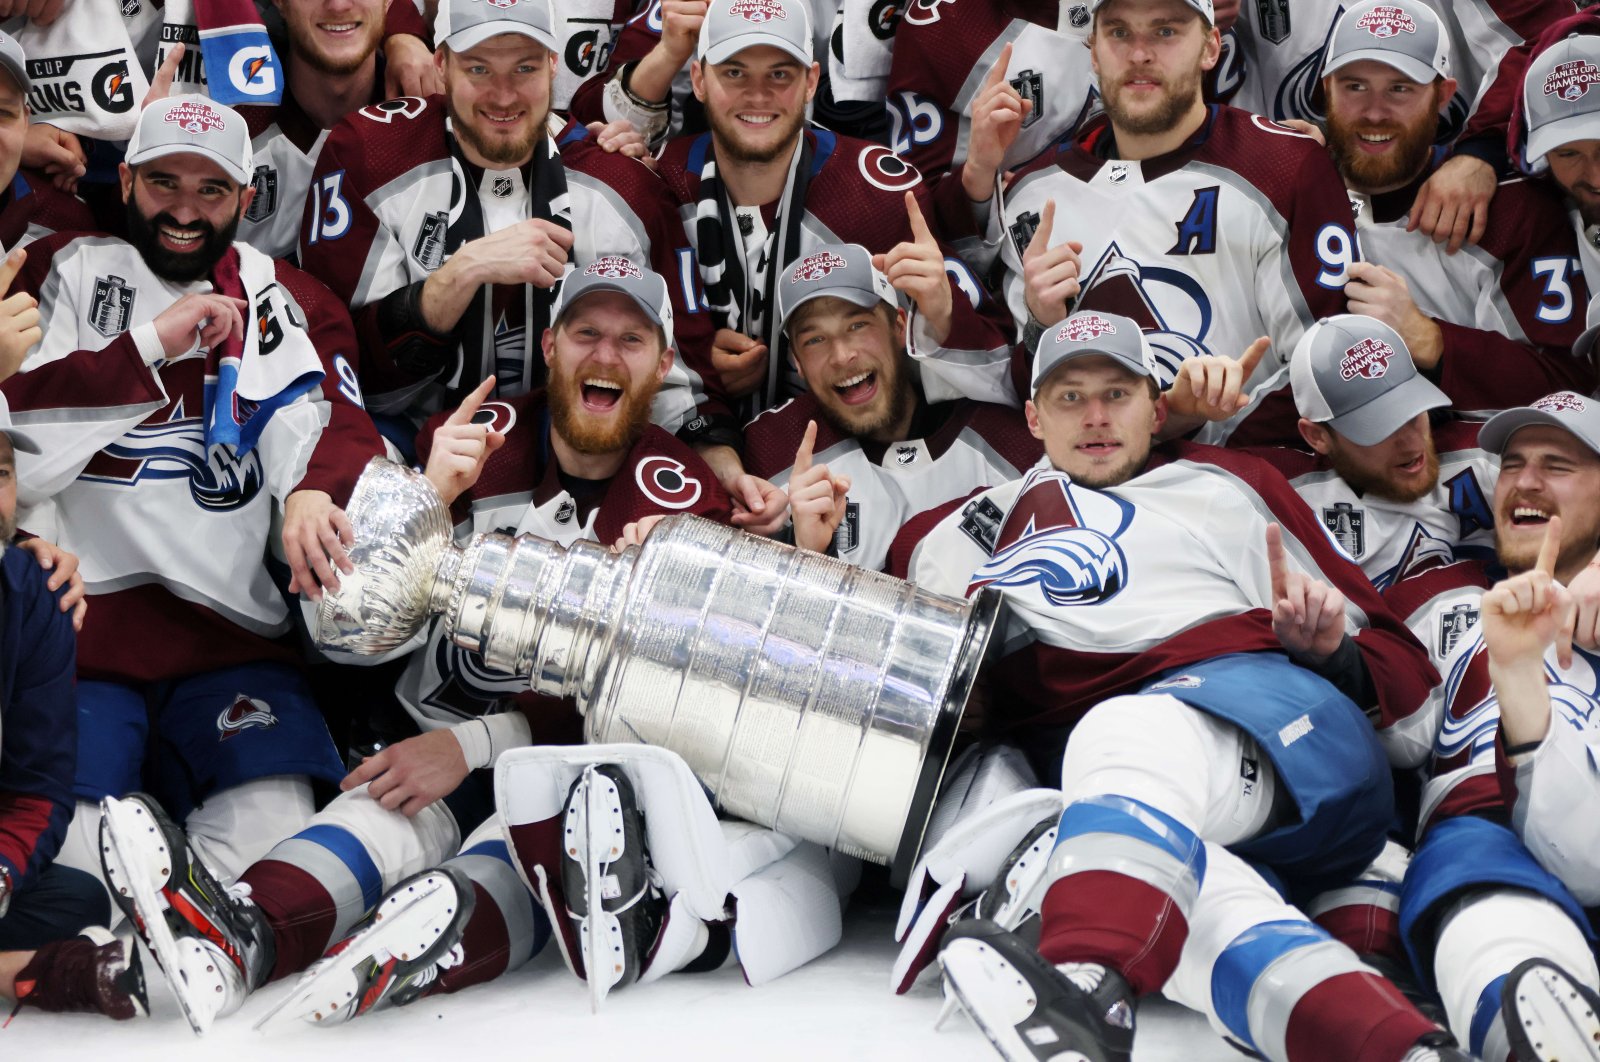 Colorado Avalanche players and staff celebrate winning the Stanley Cup after beating Tampa Bay Lightning, Tampa, Florida, June 26, 2022. (AFP Photo)